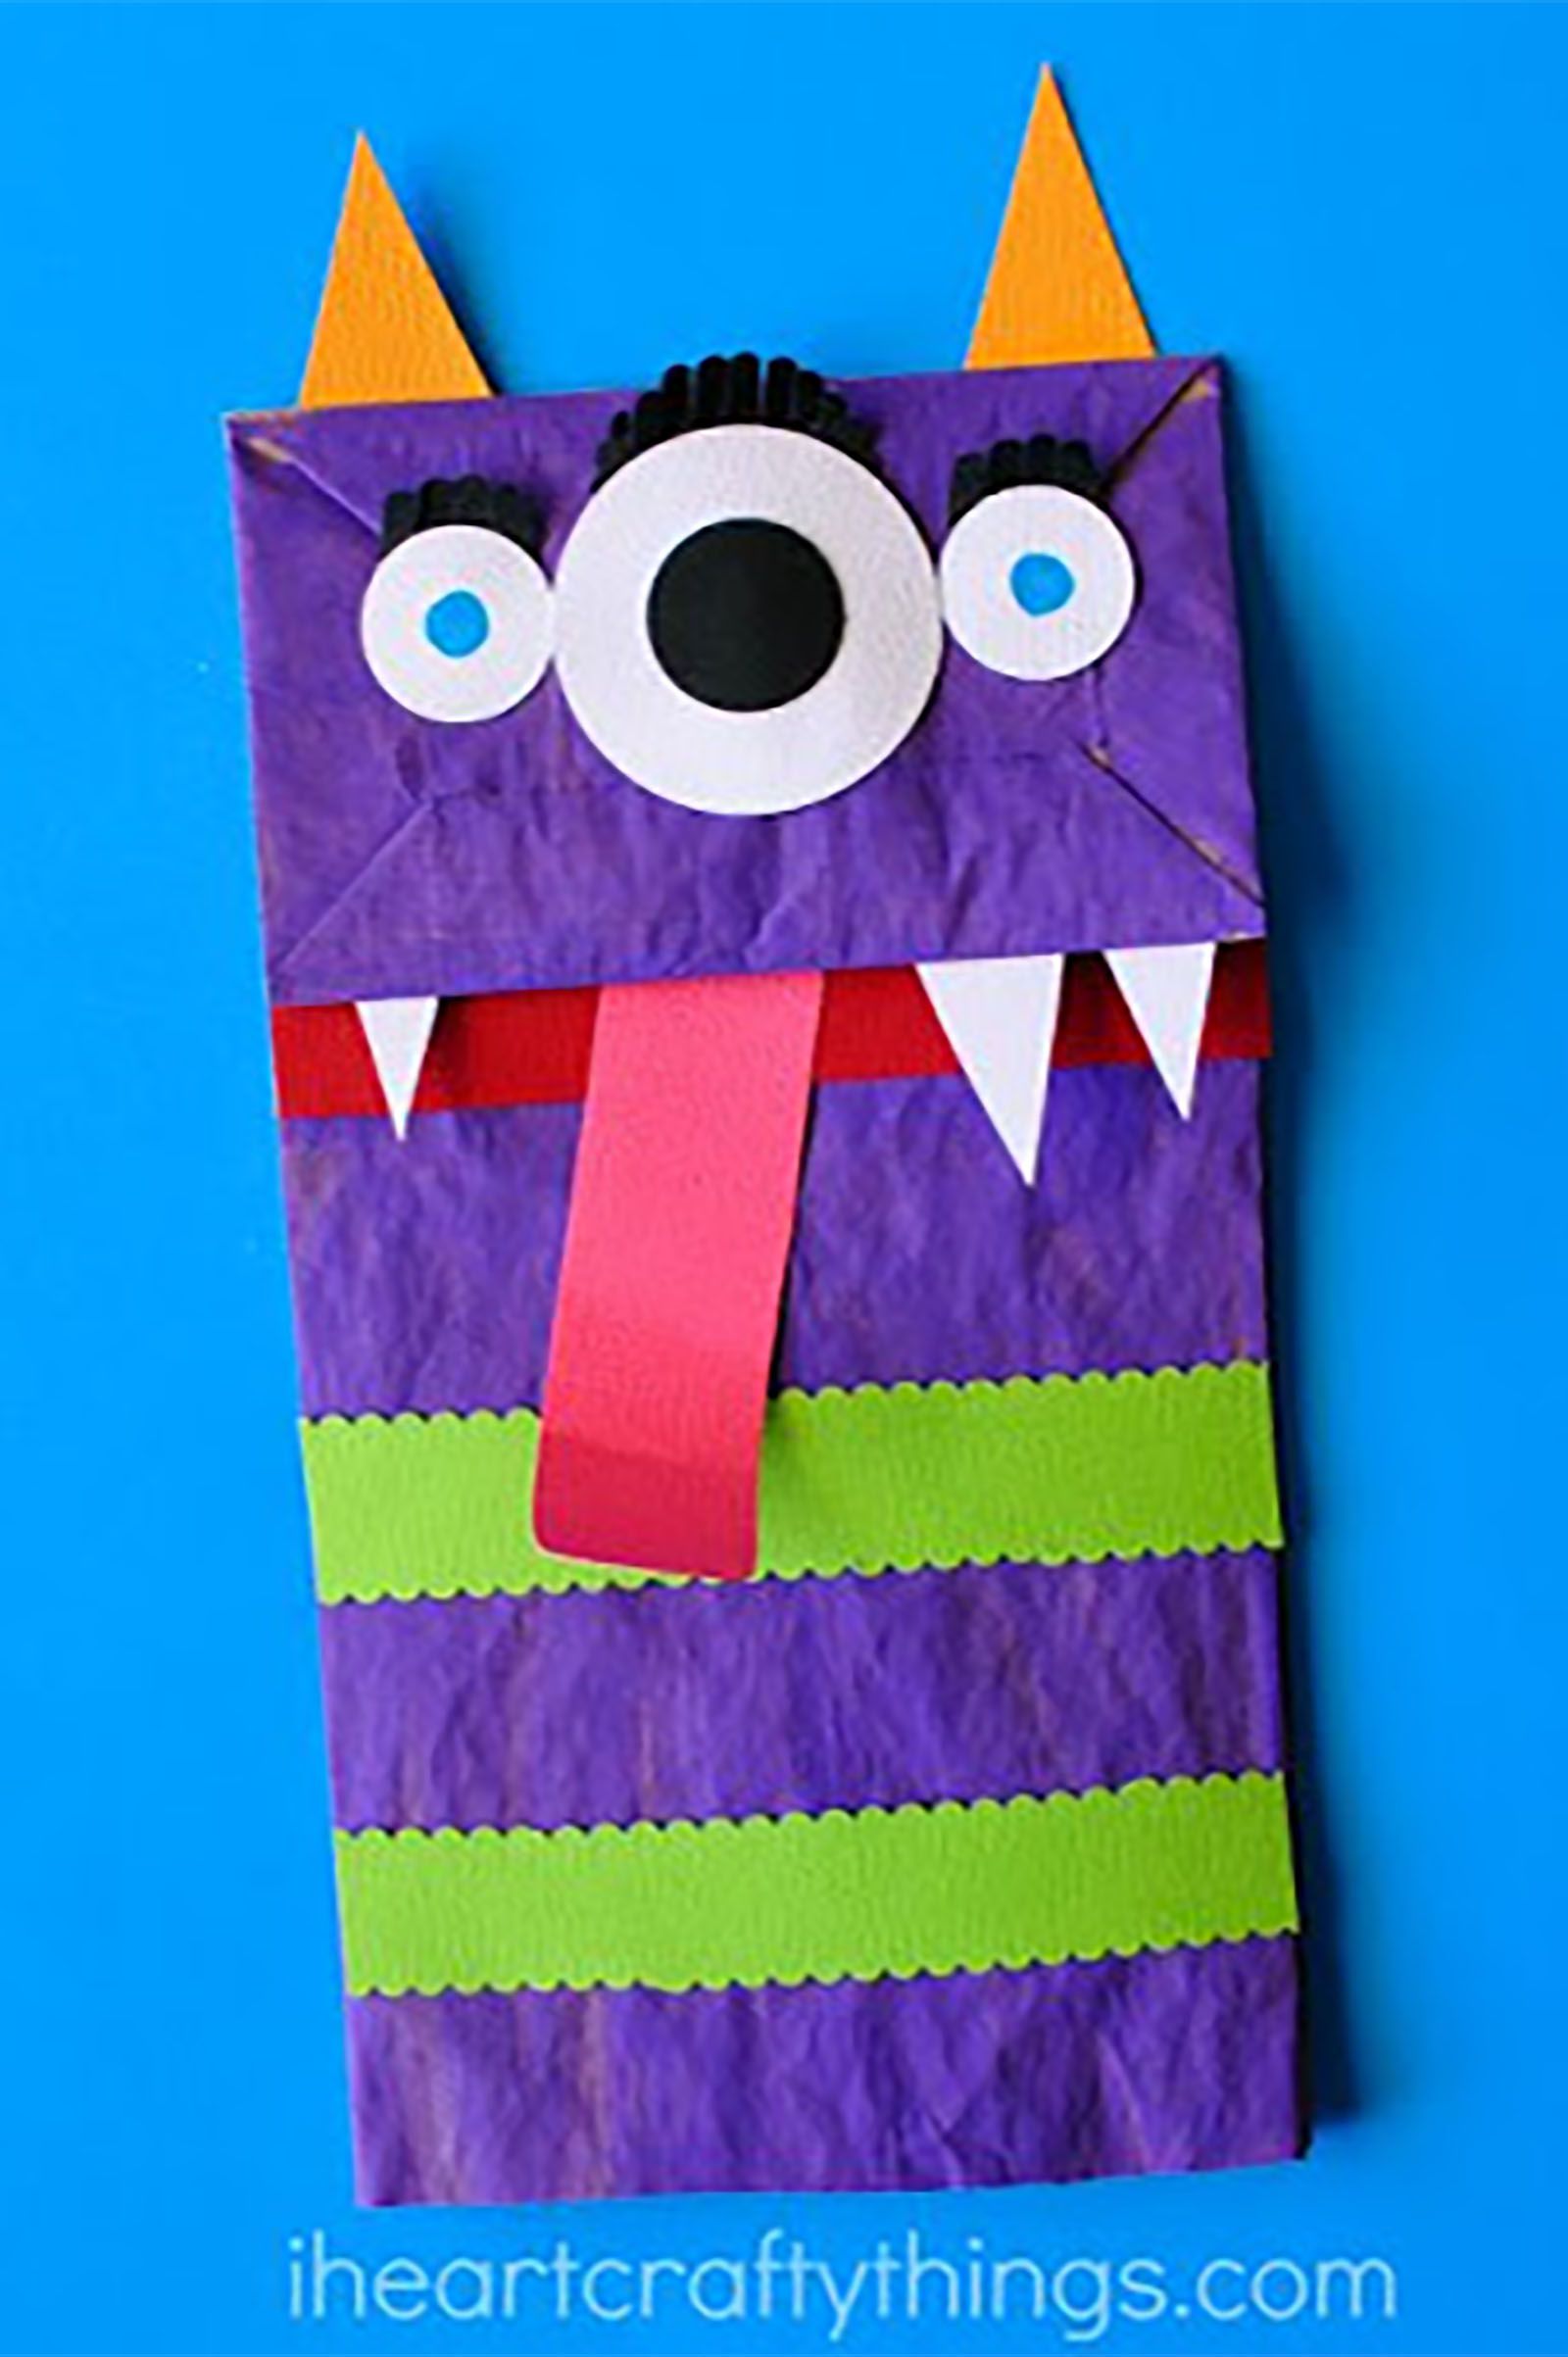 10 Easy Craft Ideas For Kids - Fun DIY Craft Projects for Kids to Make